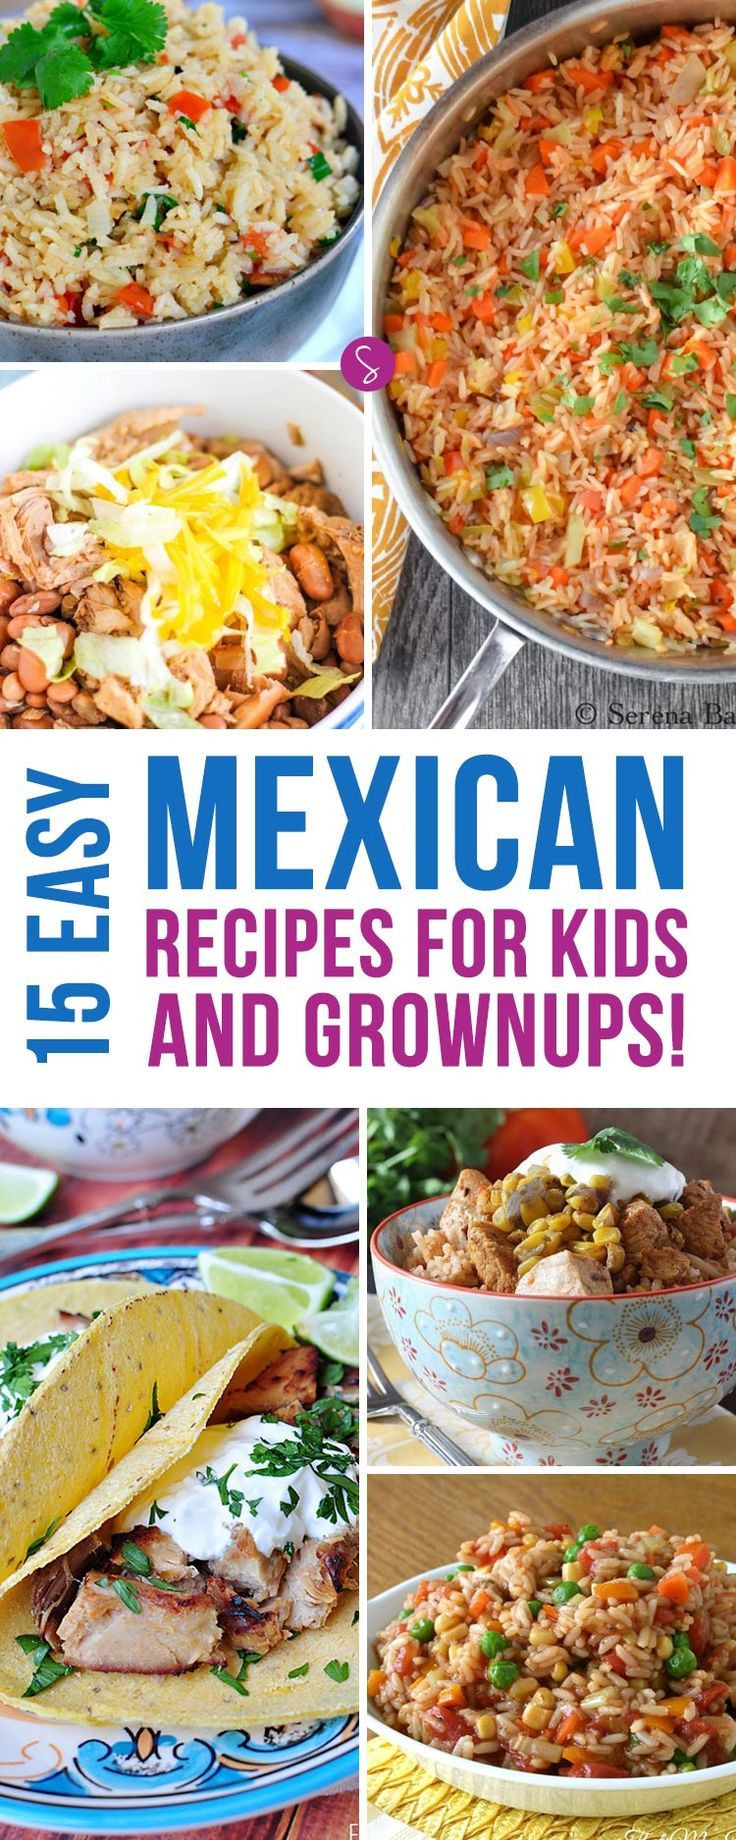 Easy Mexican Dinner Recipes
 15 Easy Mexican Dinner Ideas Even the Kids Will Enjoy